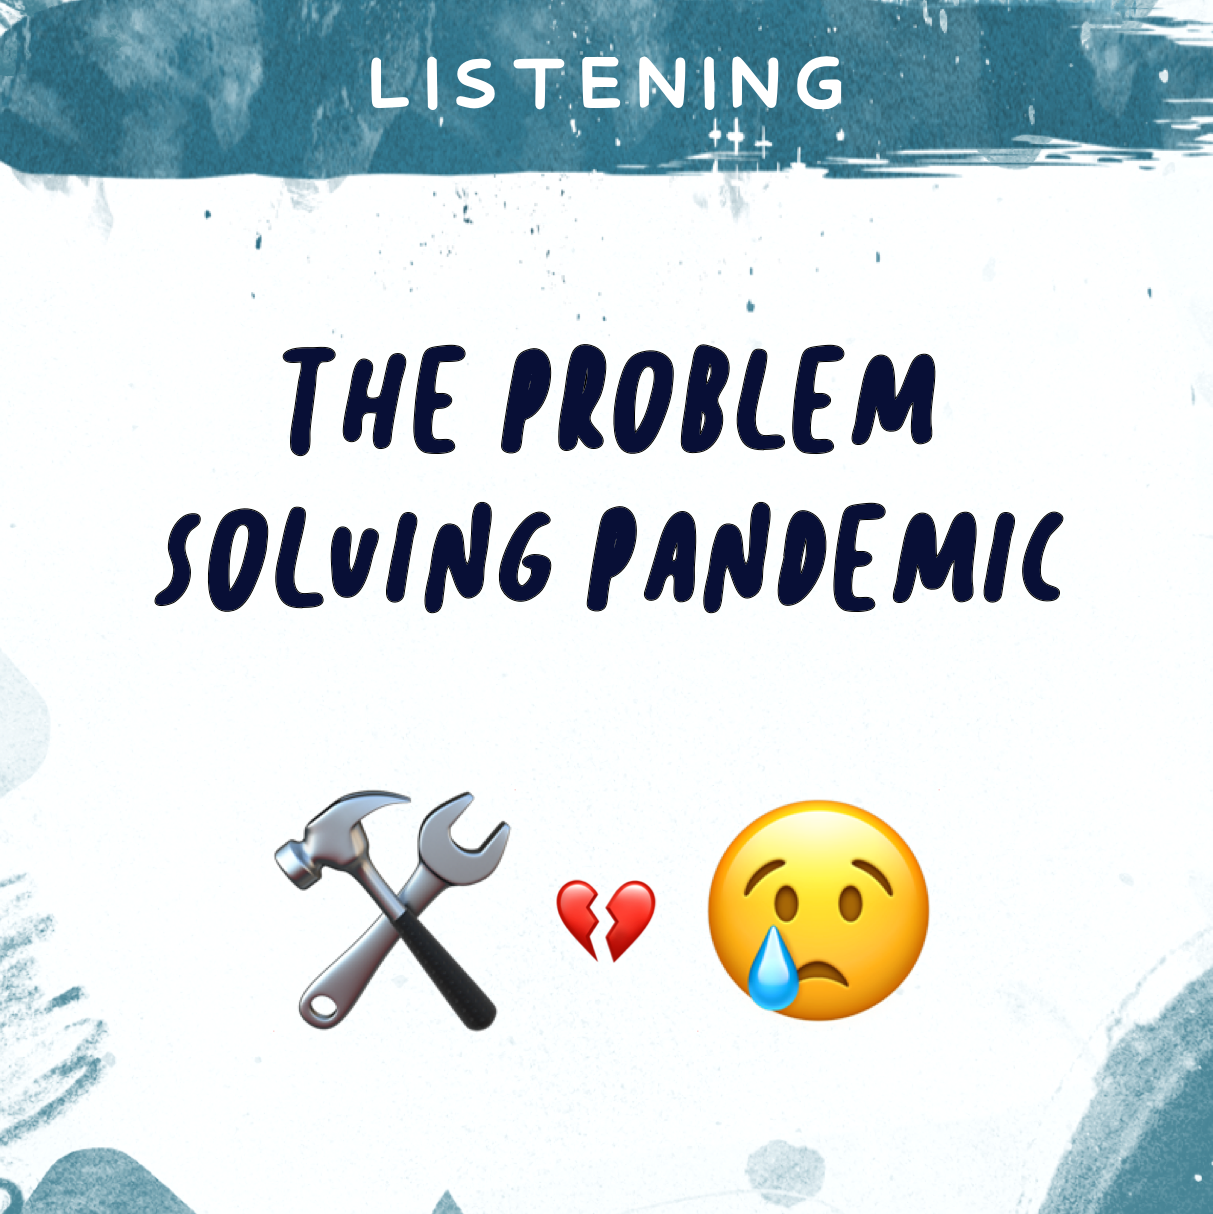 The Problem Solving Pandemic